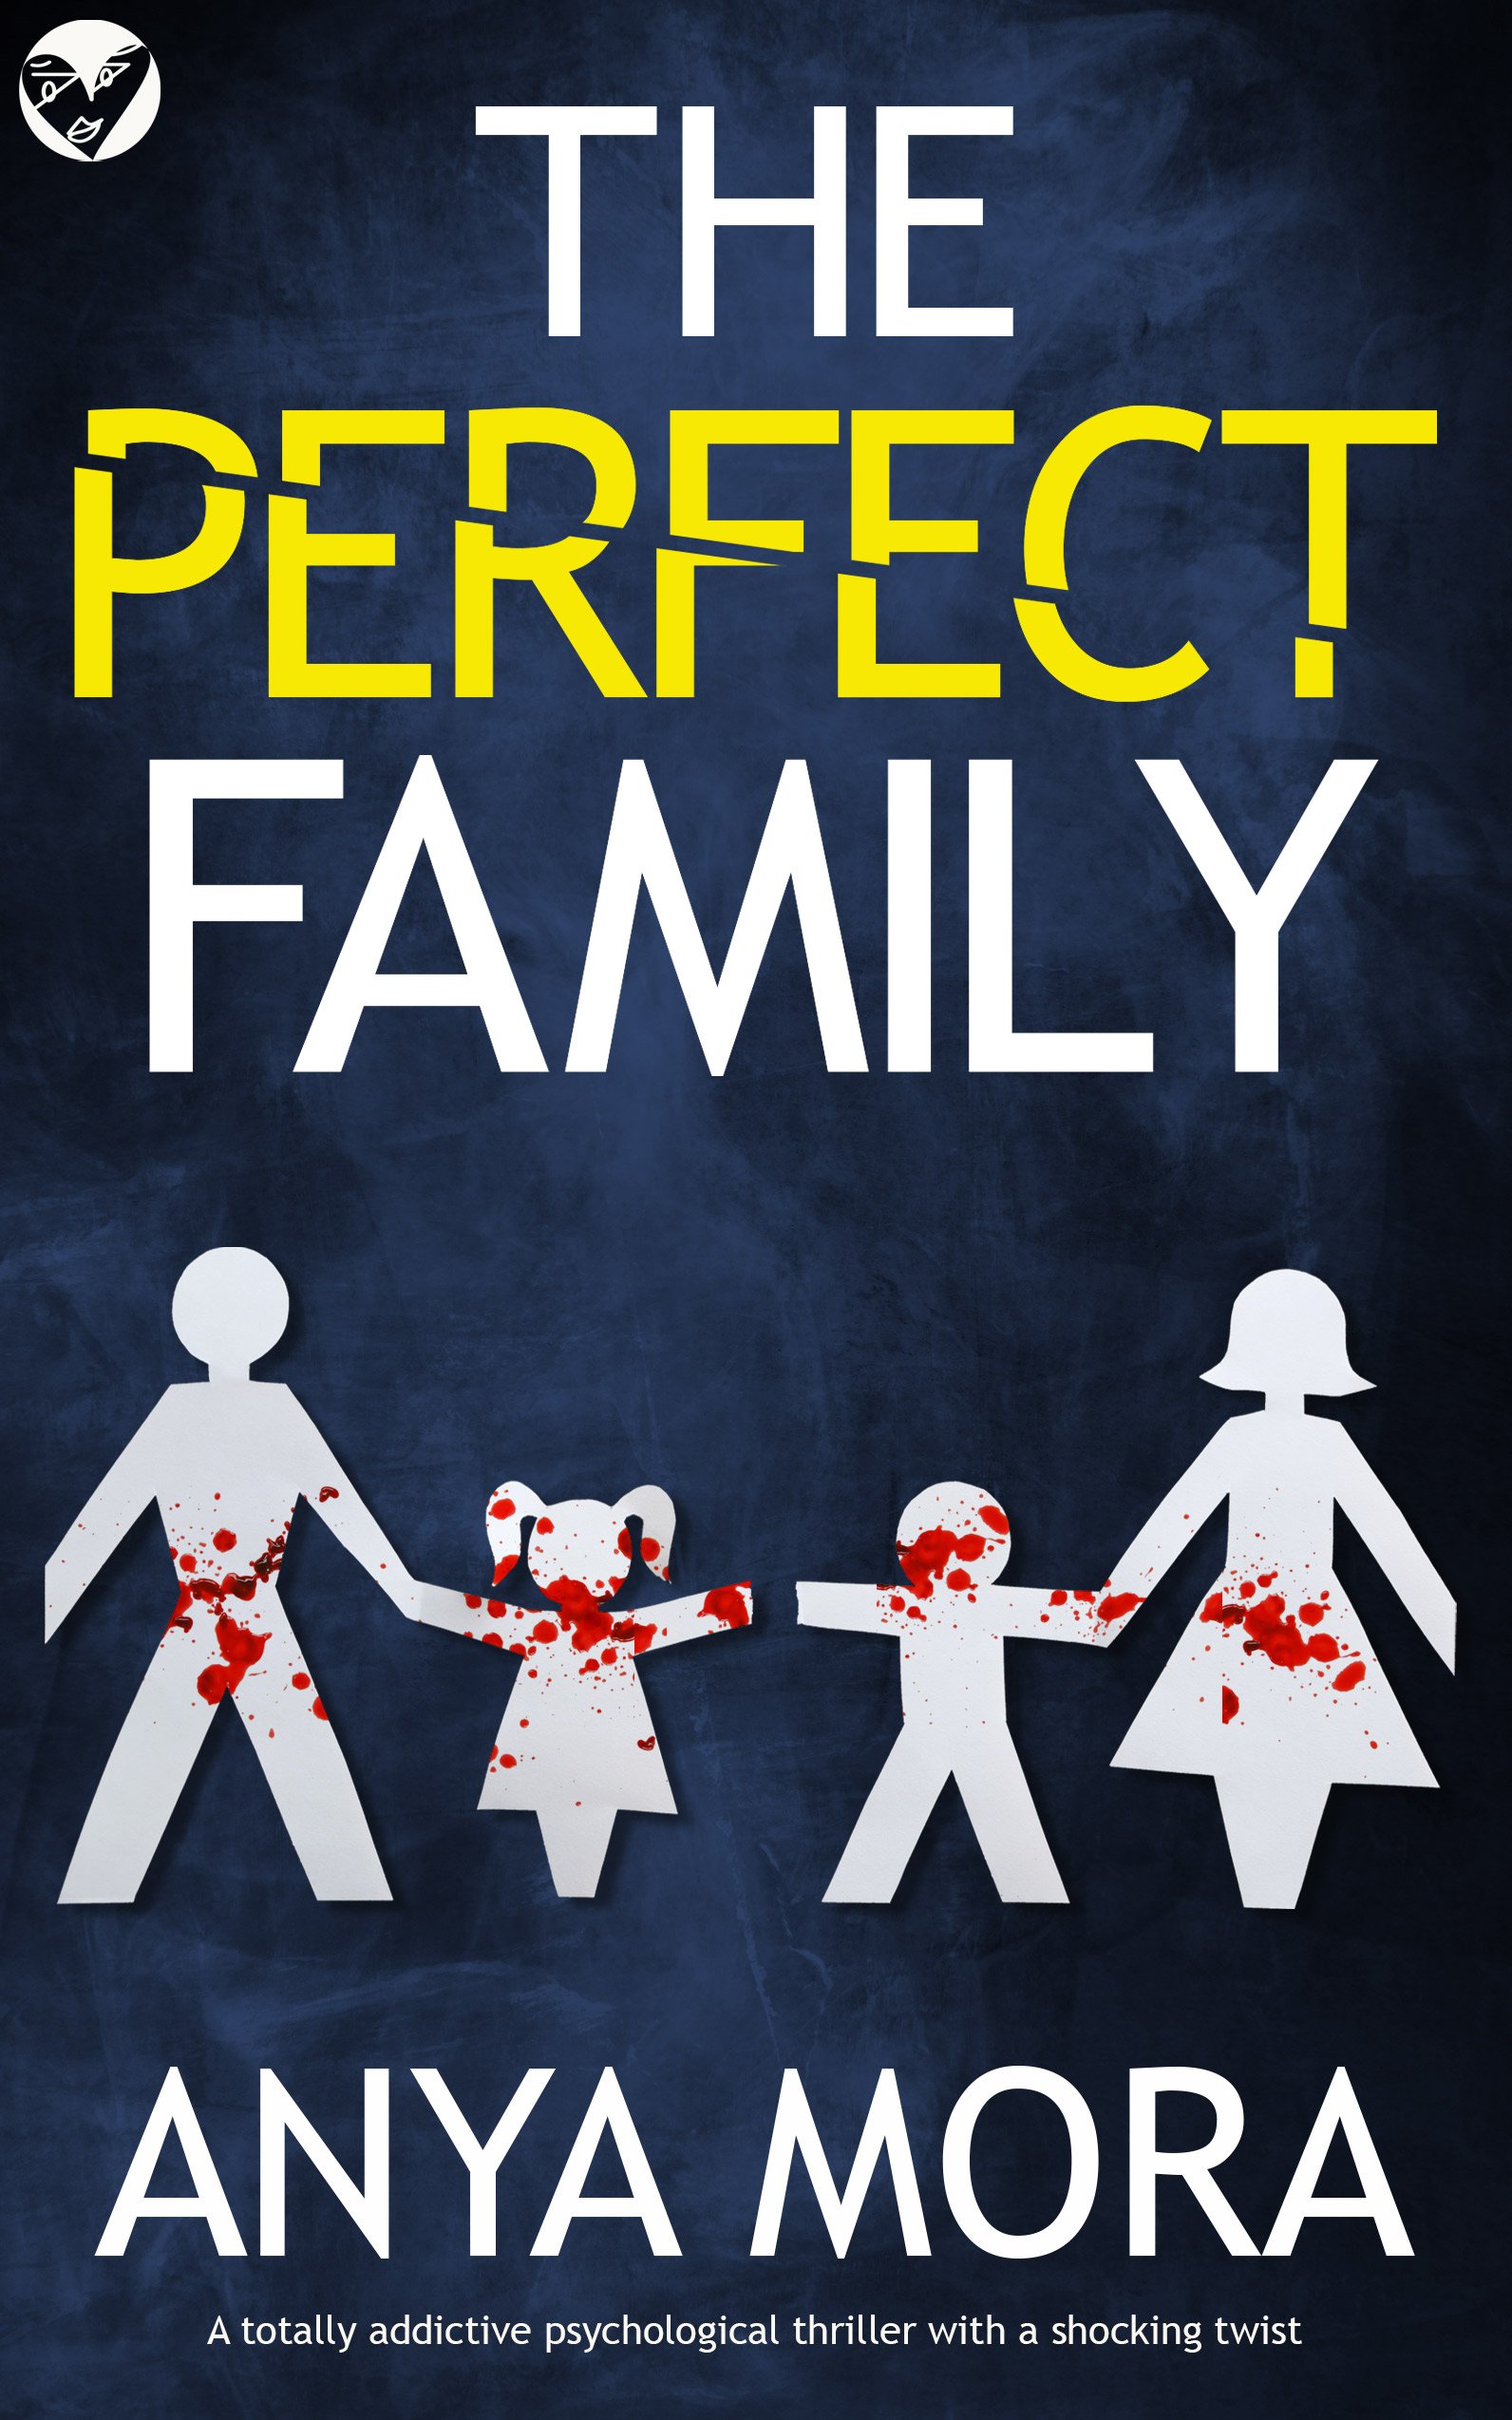 THE PERFECT FAMILY 590k Cover publish.jpg